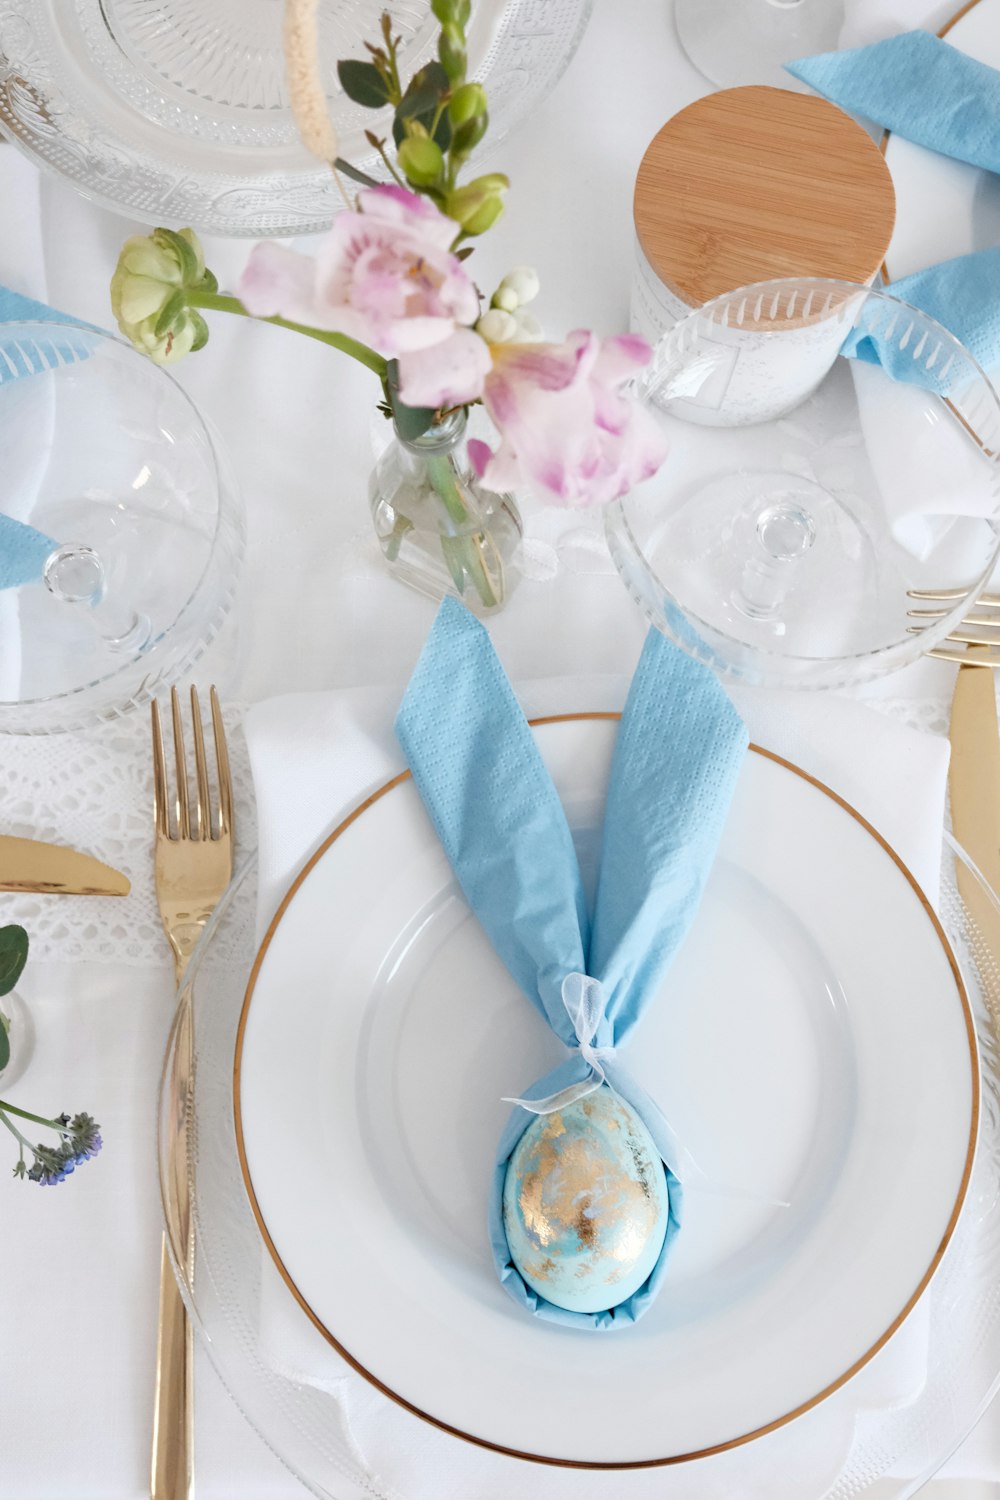 a plate with a blue napkin and flowers on it